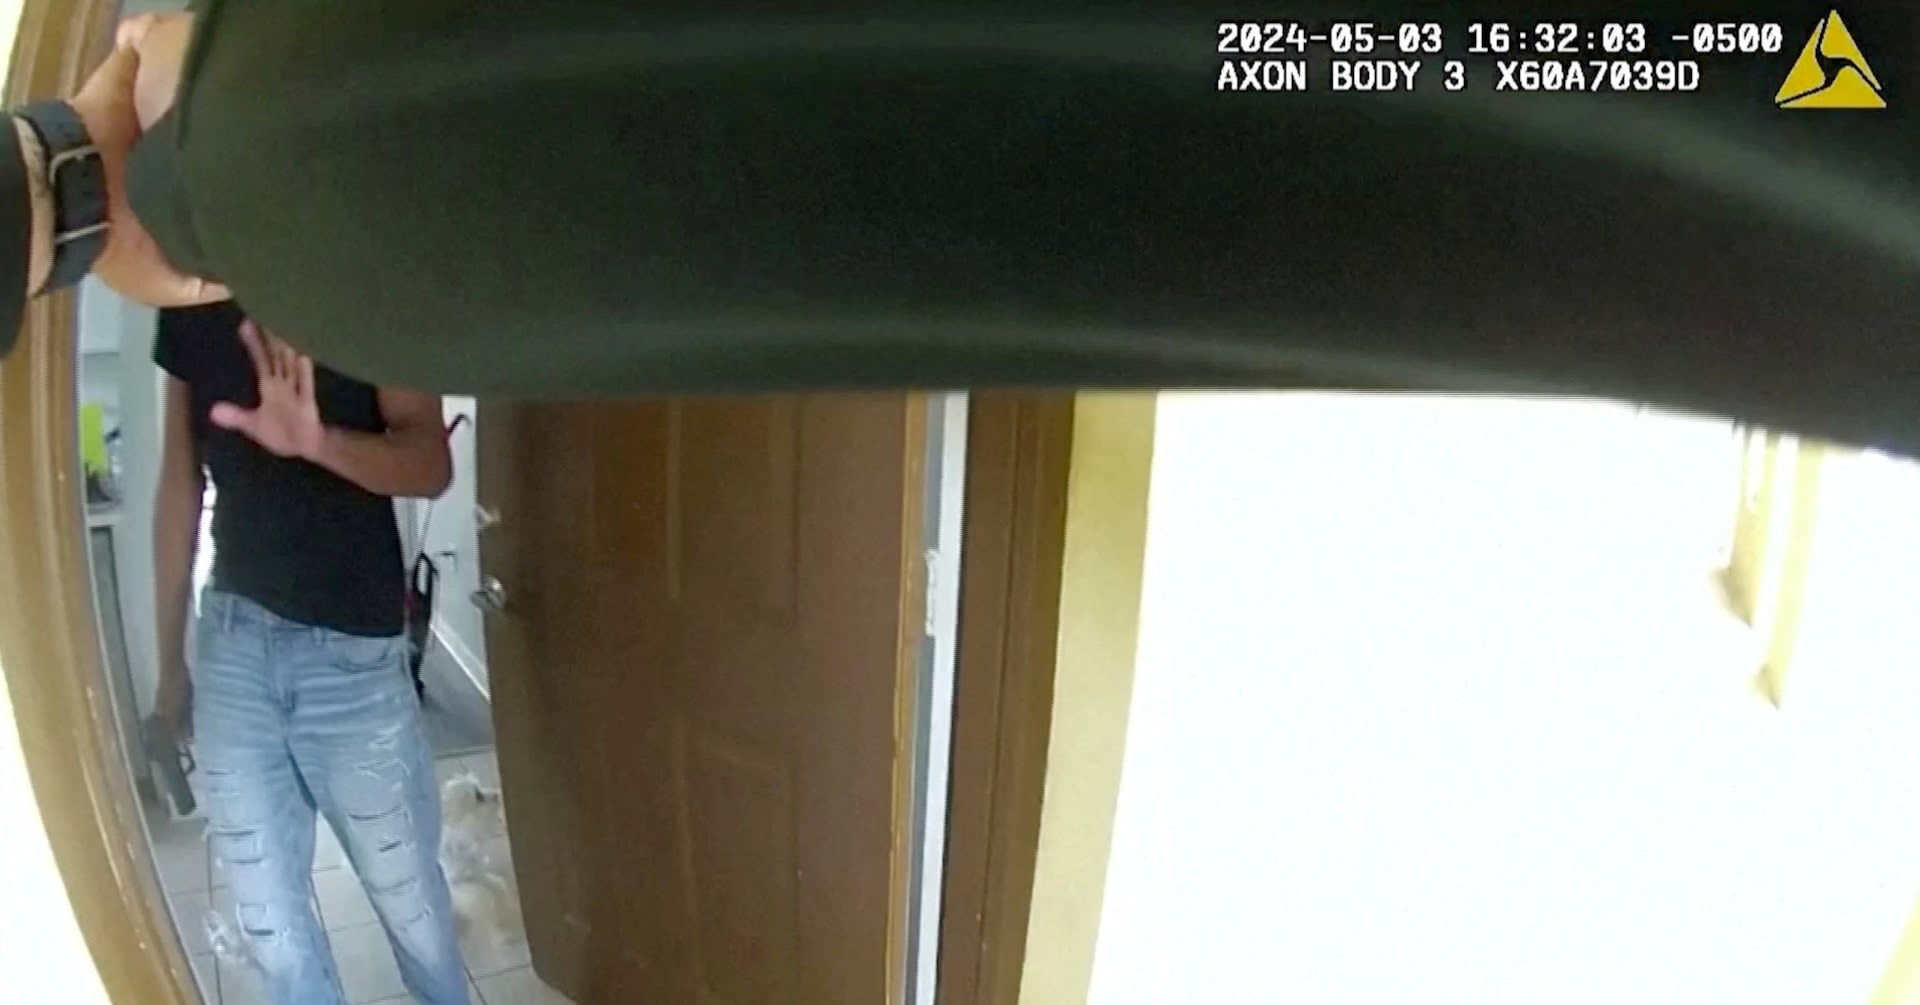 Florida sheriff releases video of deputy shooting Black man in his home